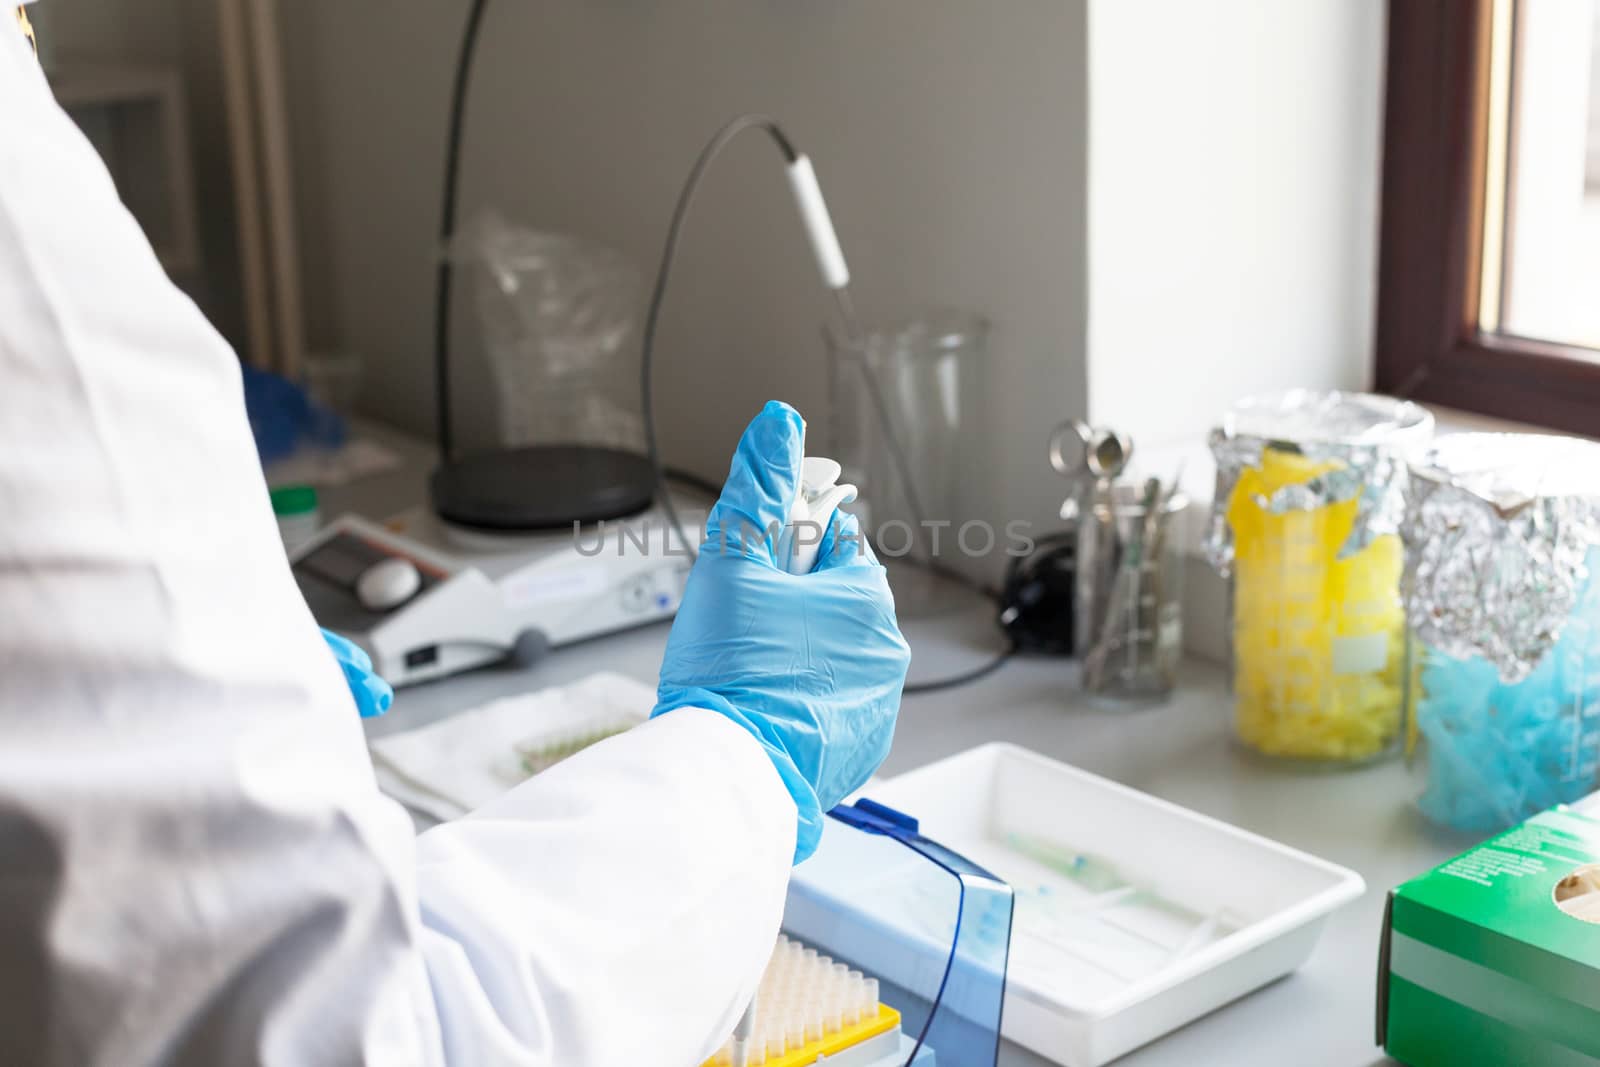 Scientist filling test tubes with pipette in laboratory by wellphoto